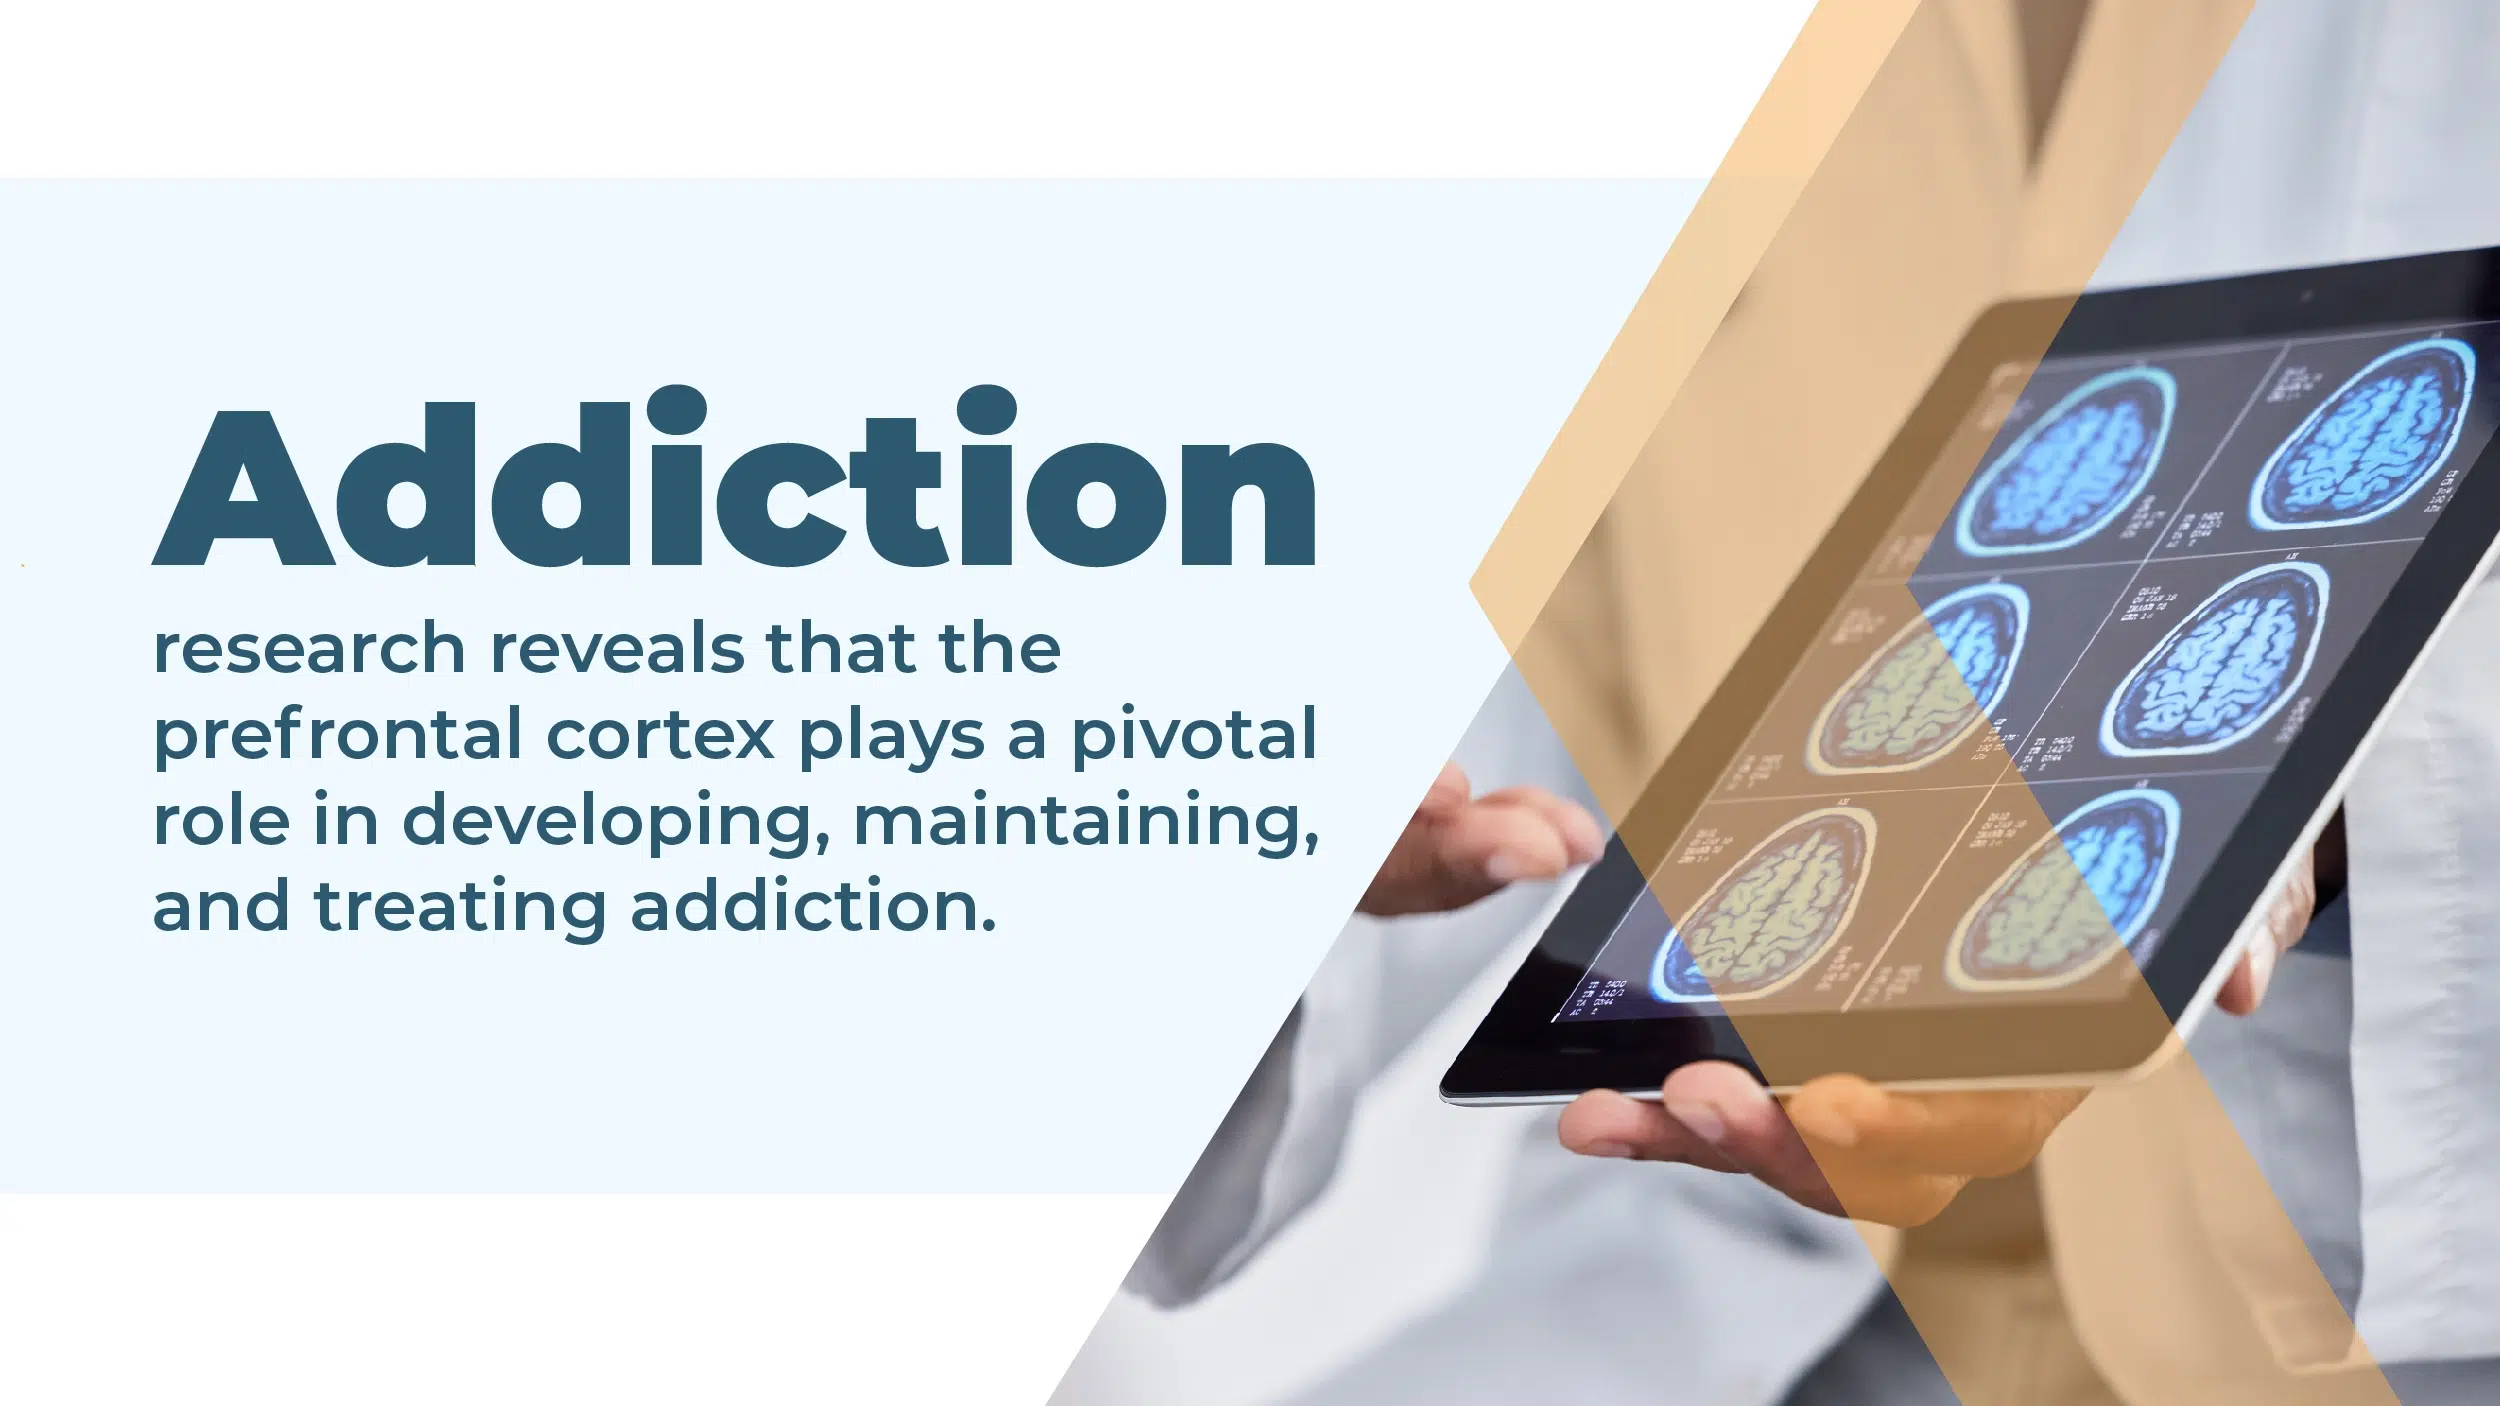 Brain scans. Addiction research reveals that the prefrontal cortex plays a pivotal role in developing, maintaining, and treating addiction.